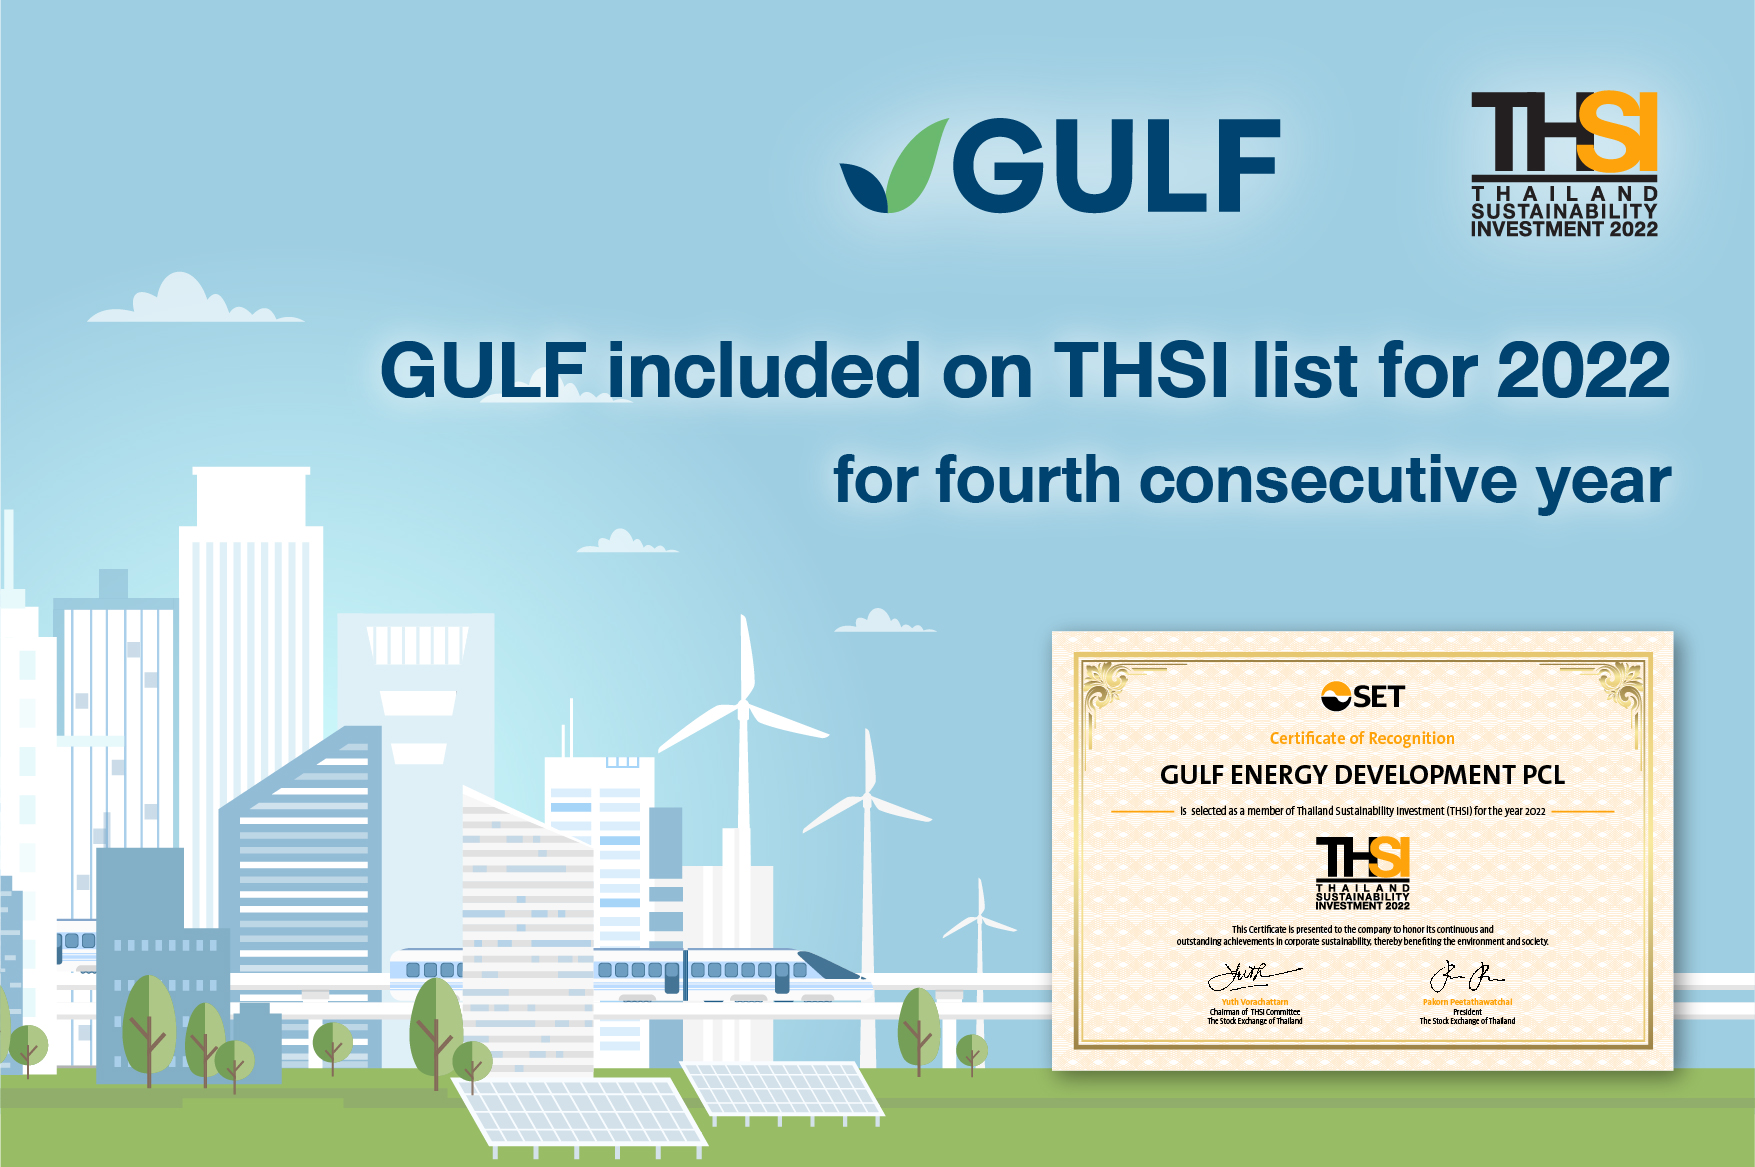 GULF listed on ‘THSI 2022’ for fourth consecutive year